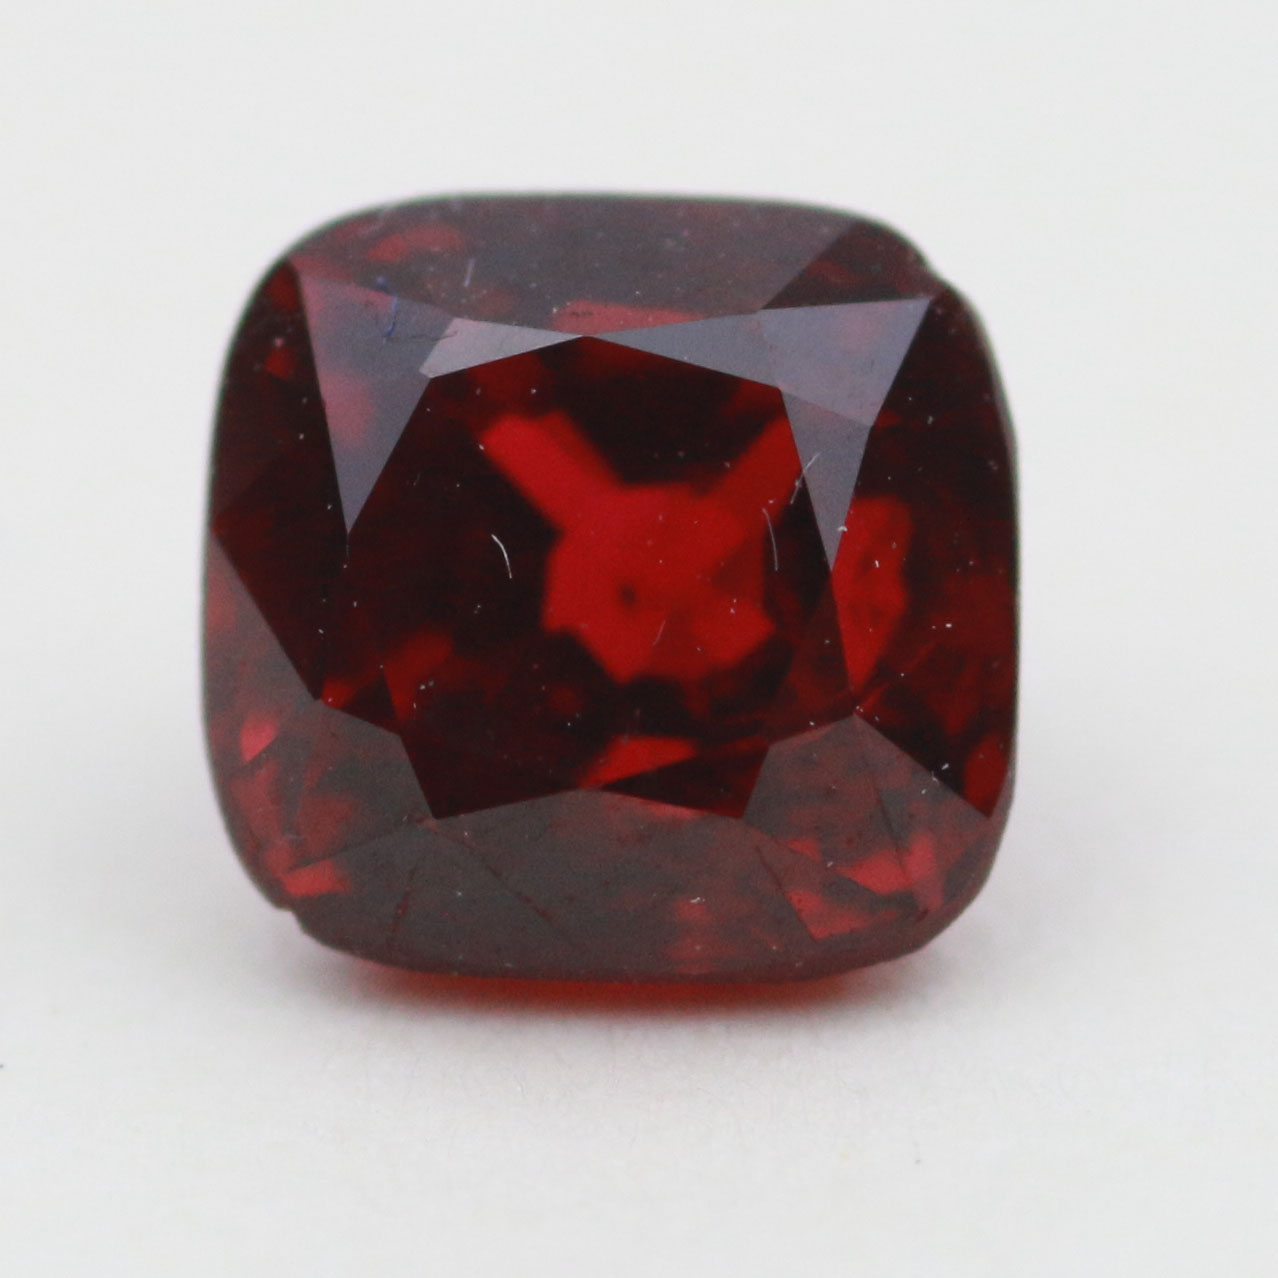 5.7X5.7 RED SPINEL CUSHION 1.28CT